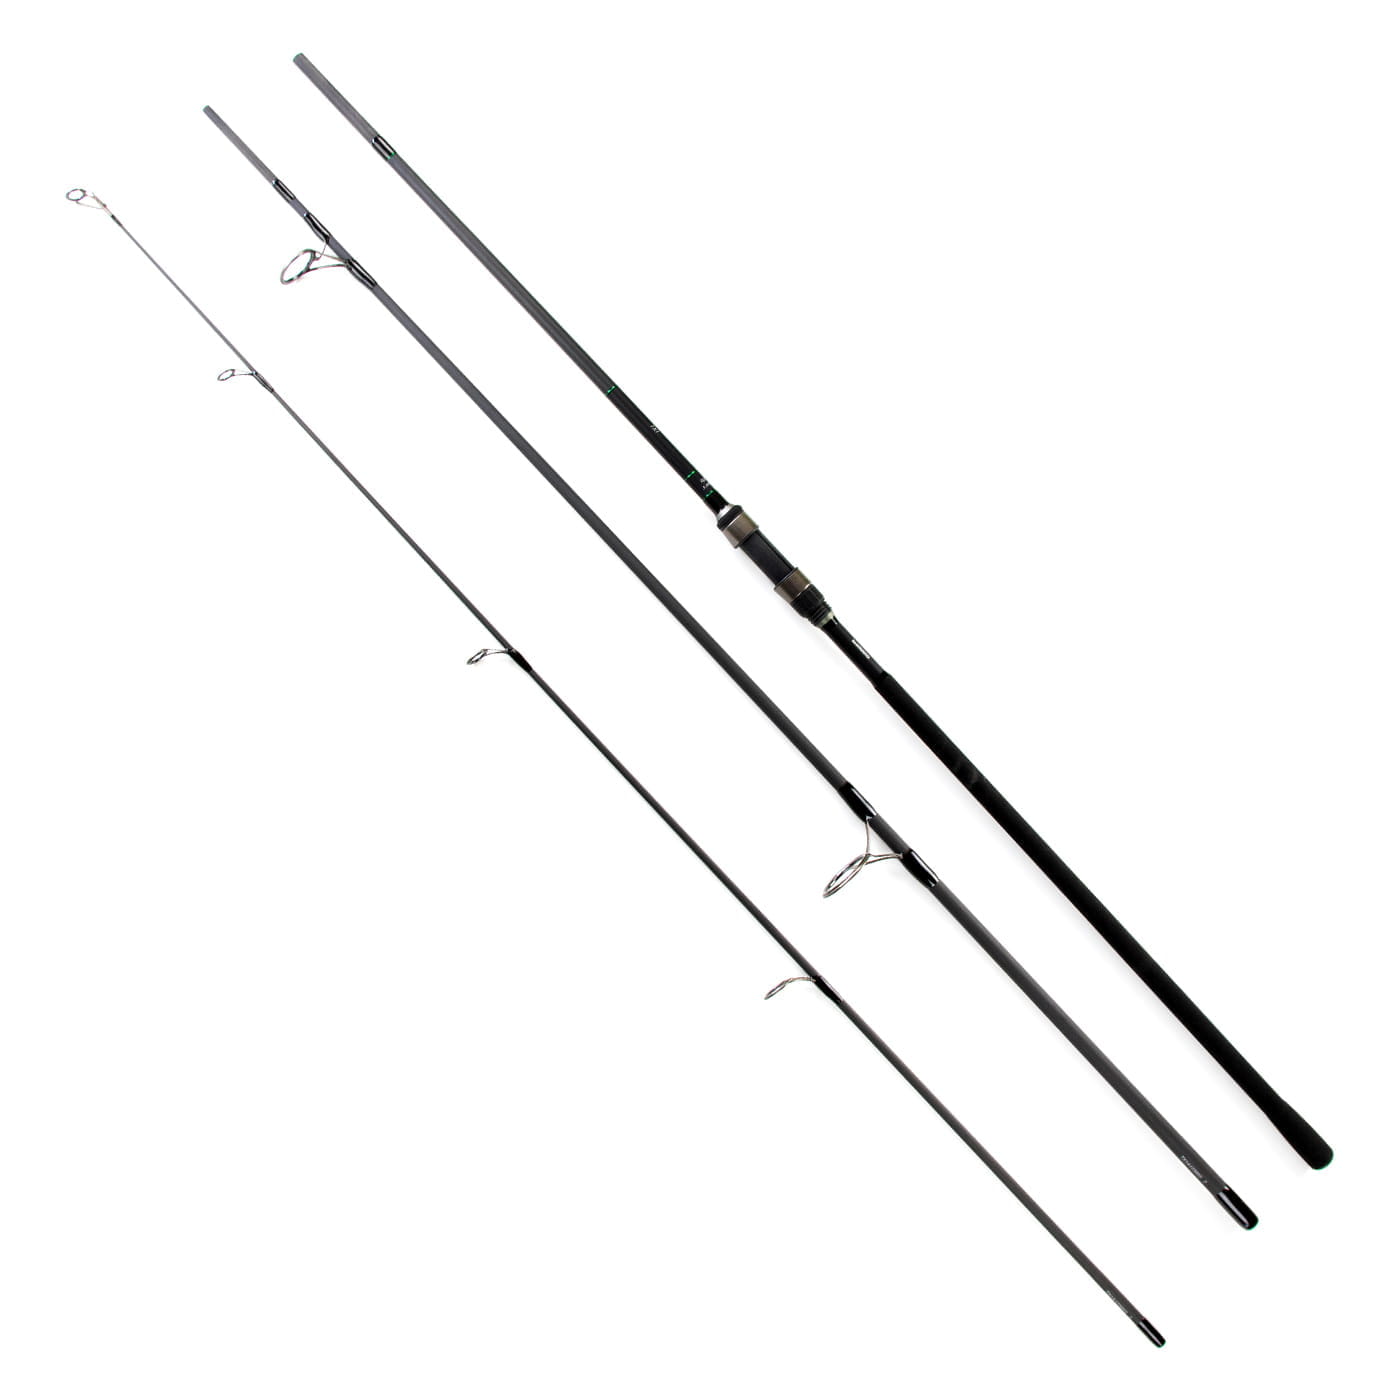 3 pieces carp rods for your fishing adventures